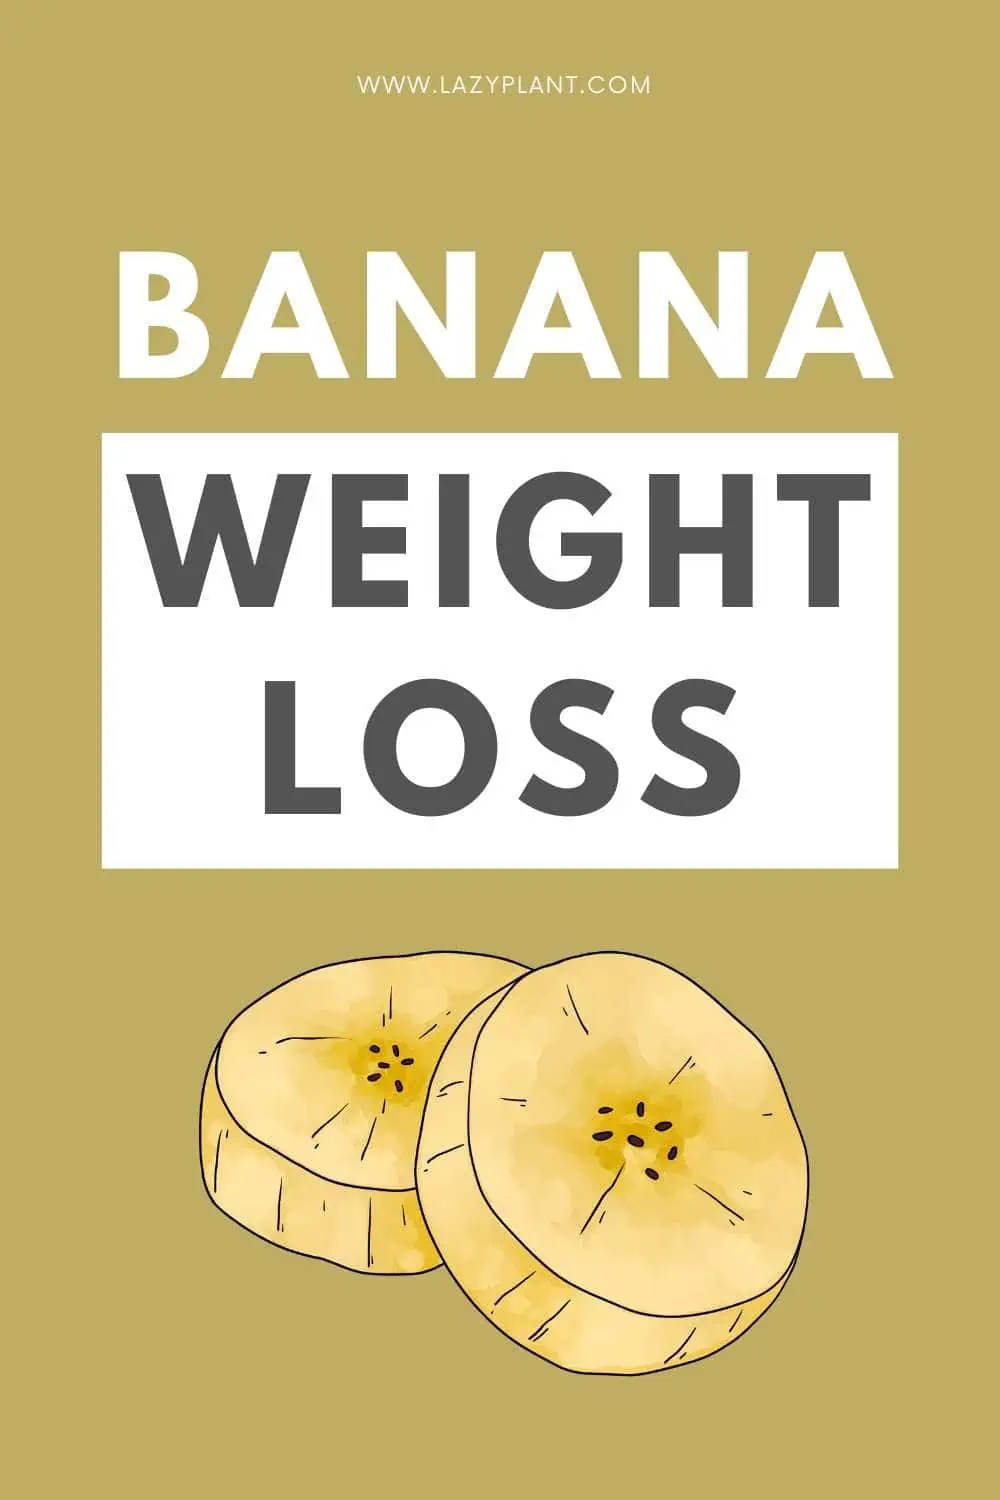 Benefits of Bananas for Weight Loss